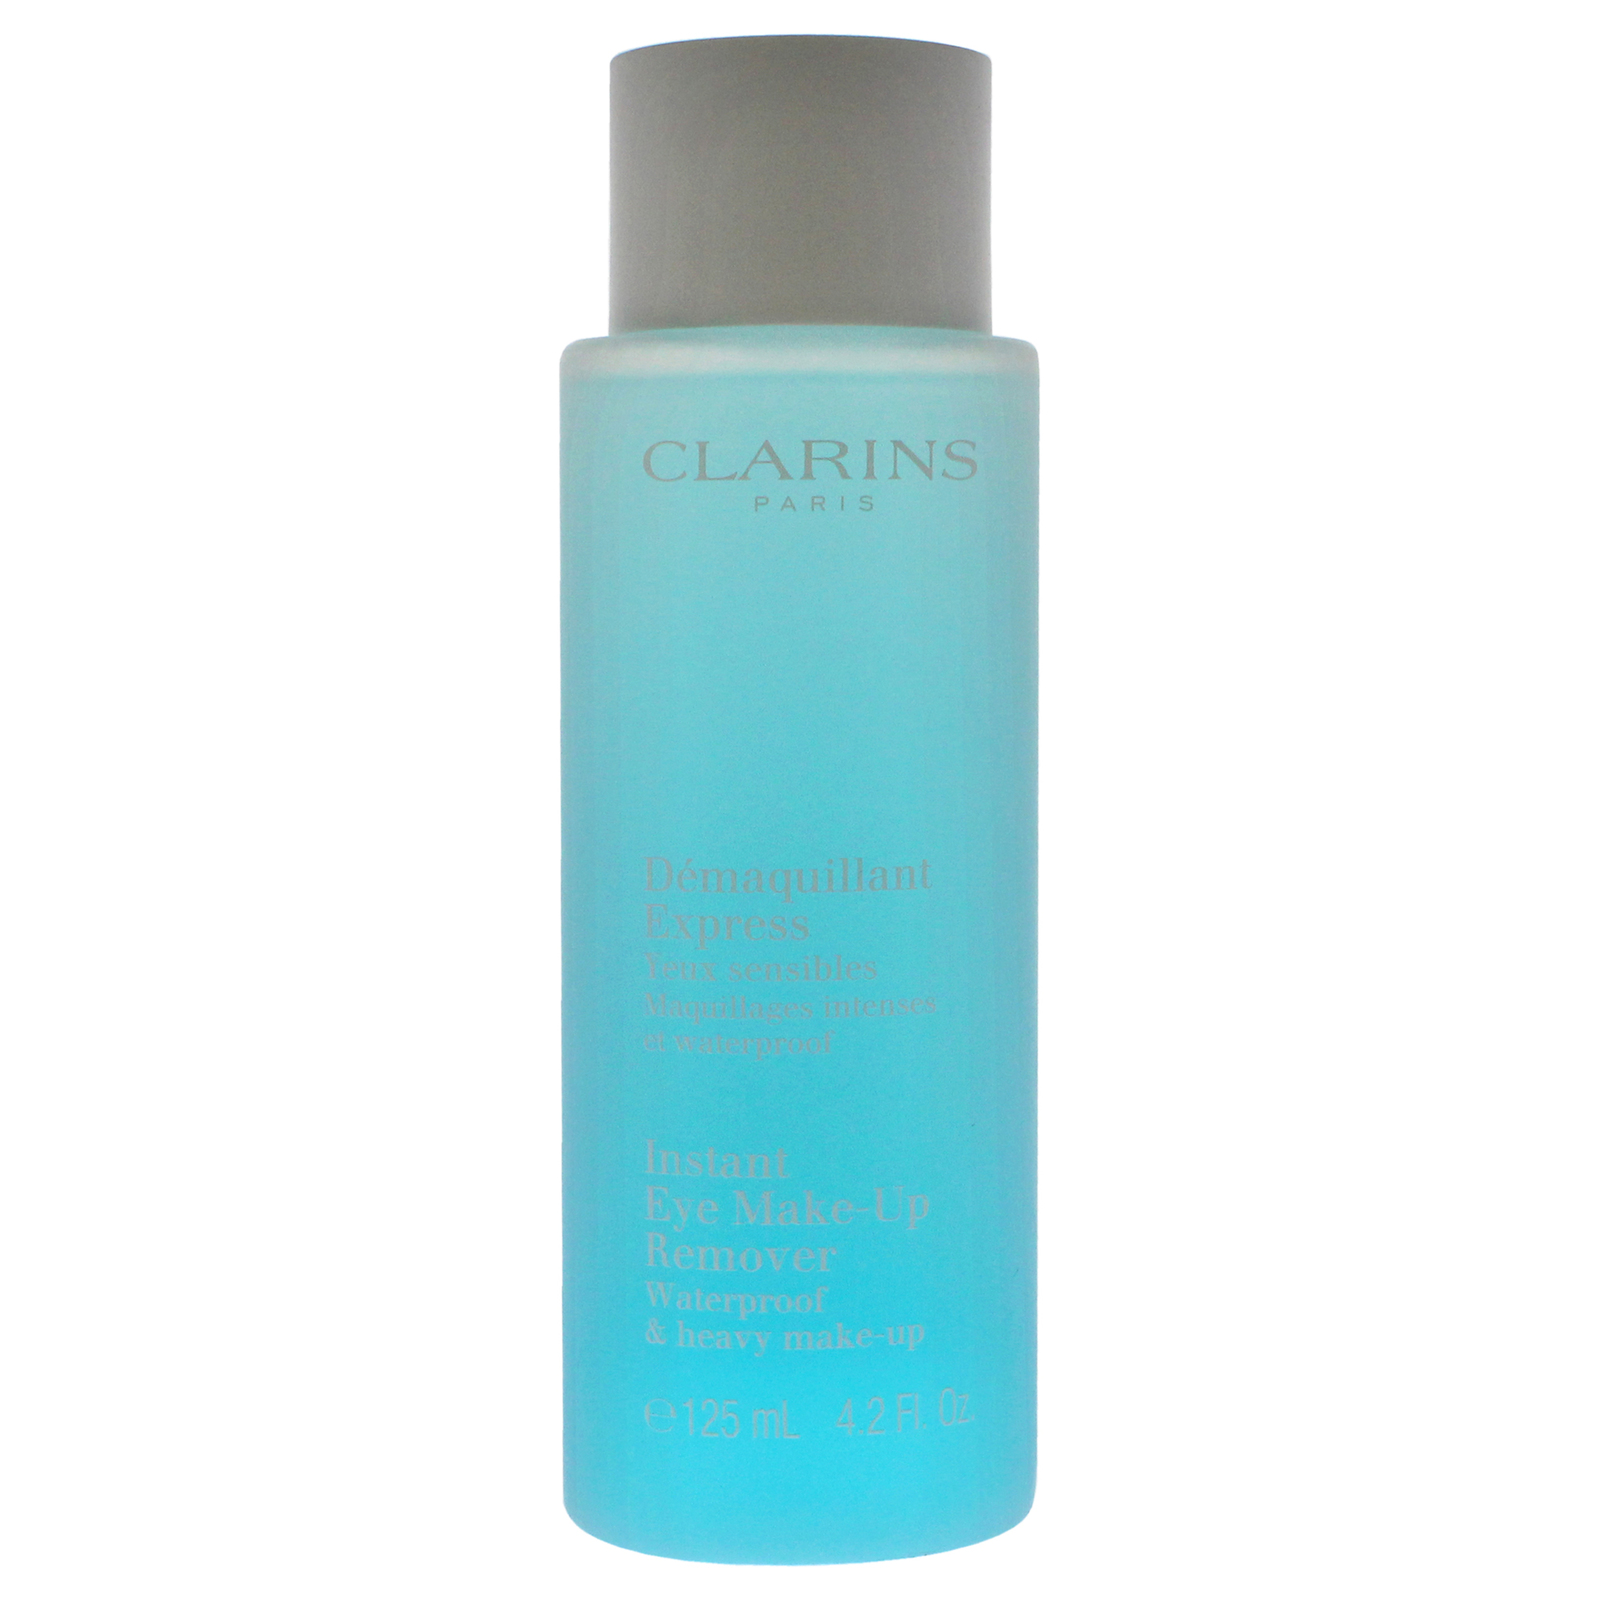 IInstant Eye Make-Up Remover by Clarins for Unisex - 4.2 oz Makeup Remover - $32.01